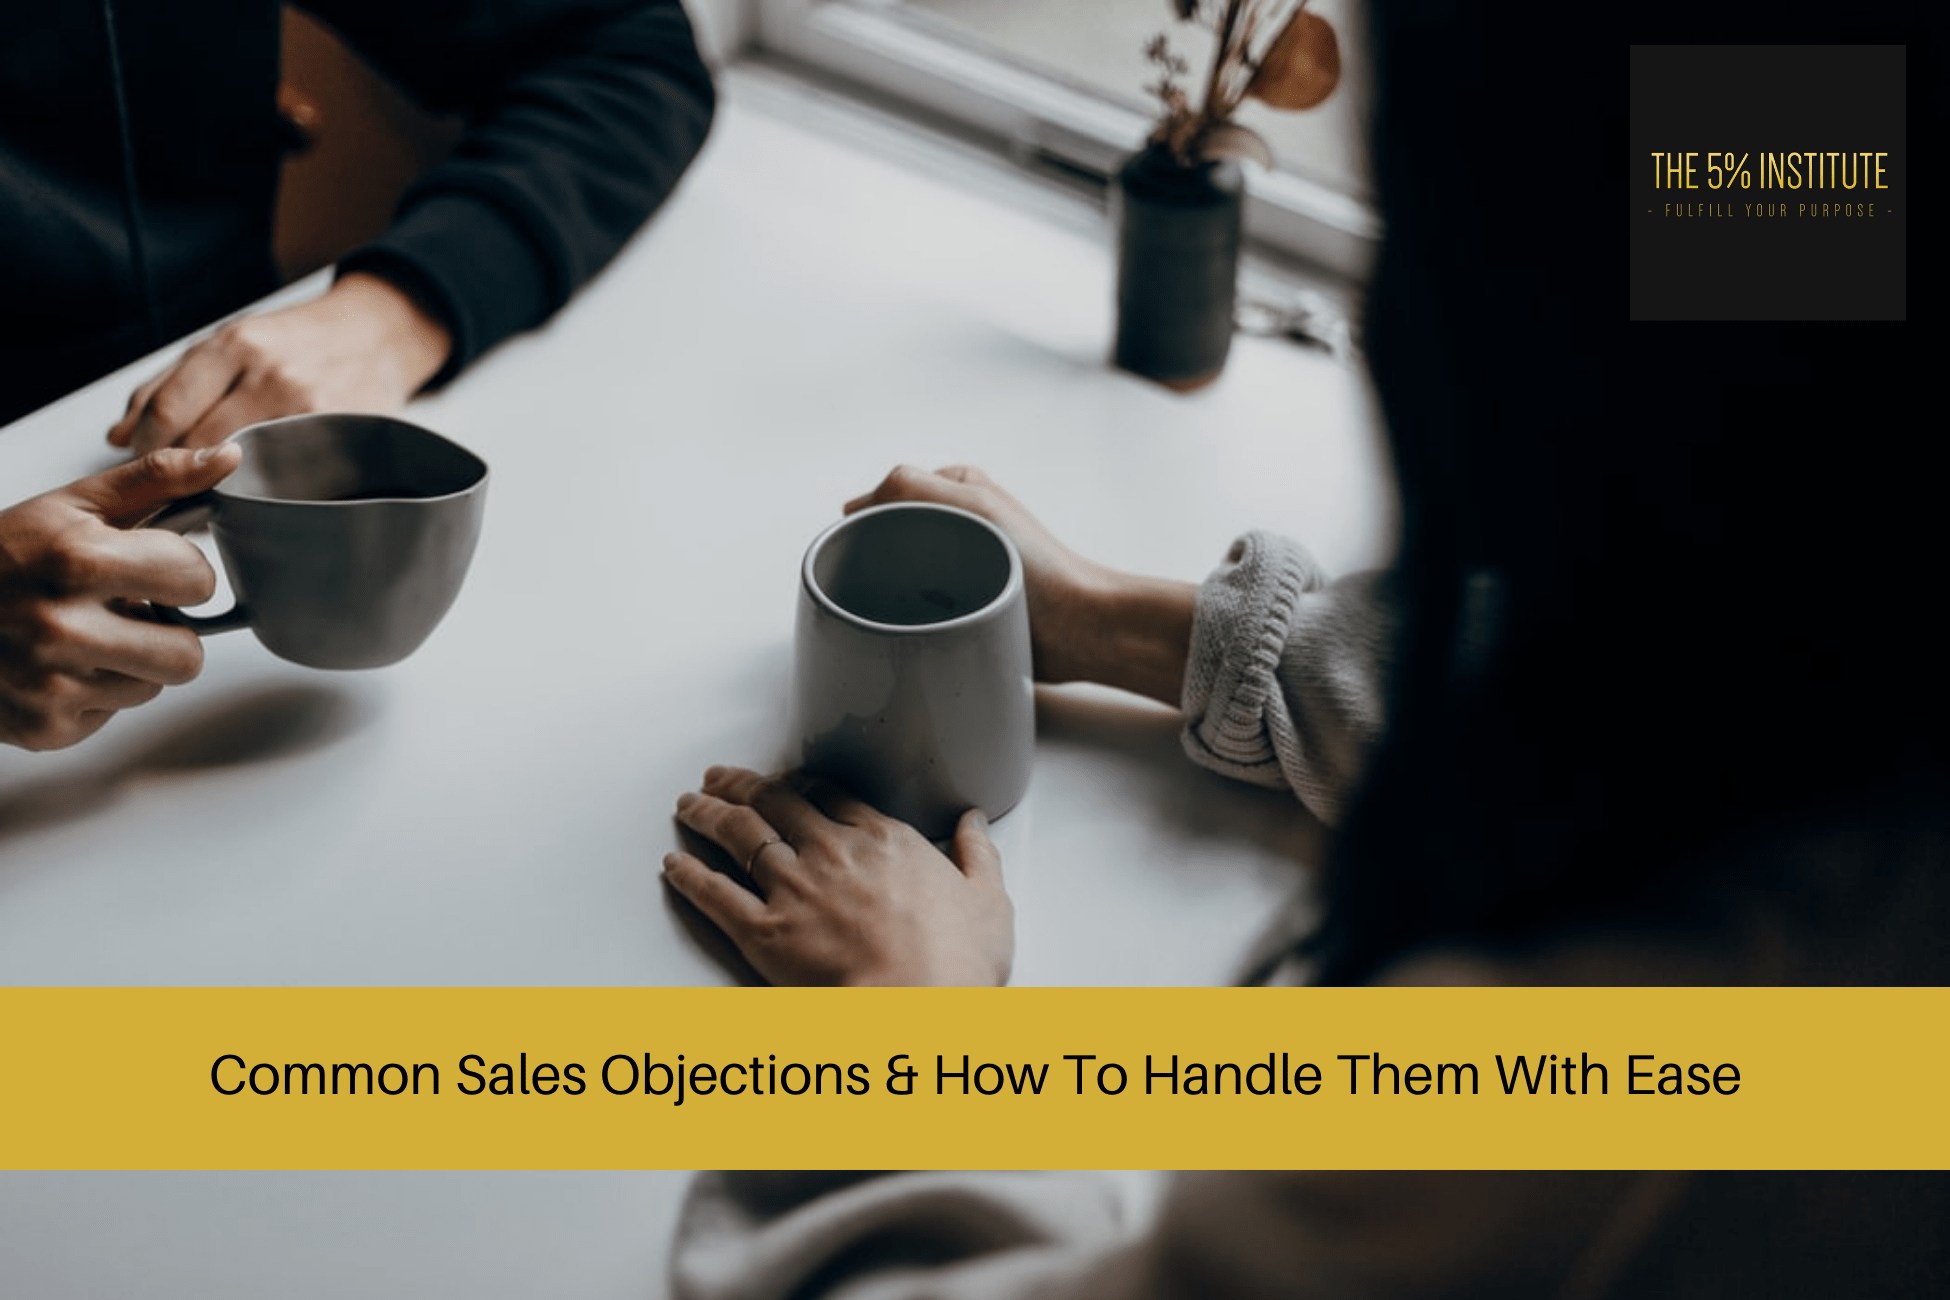 Four Common Sales Objections